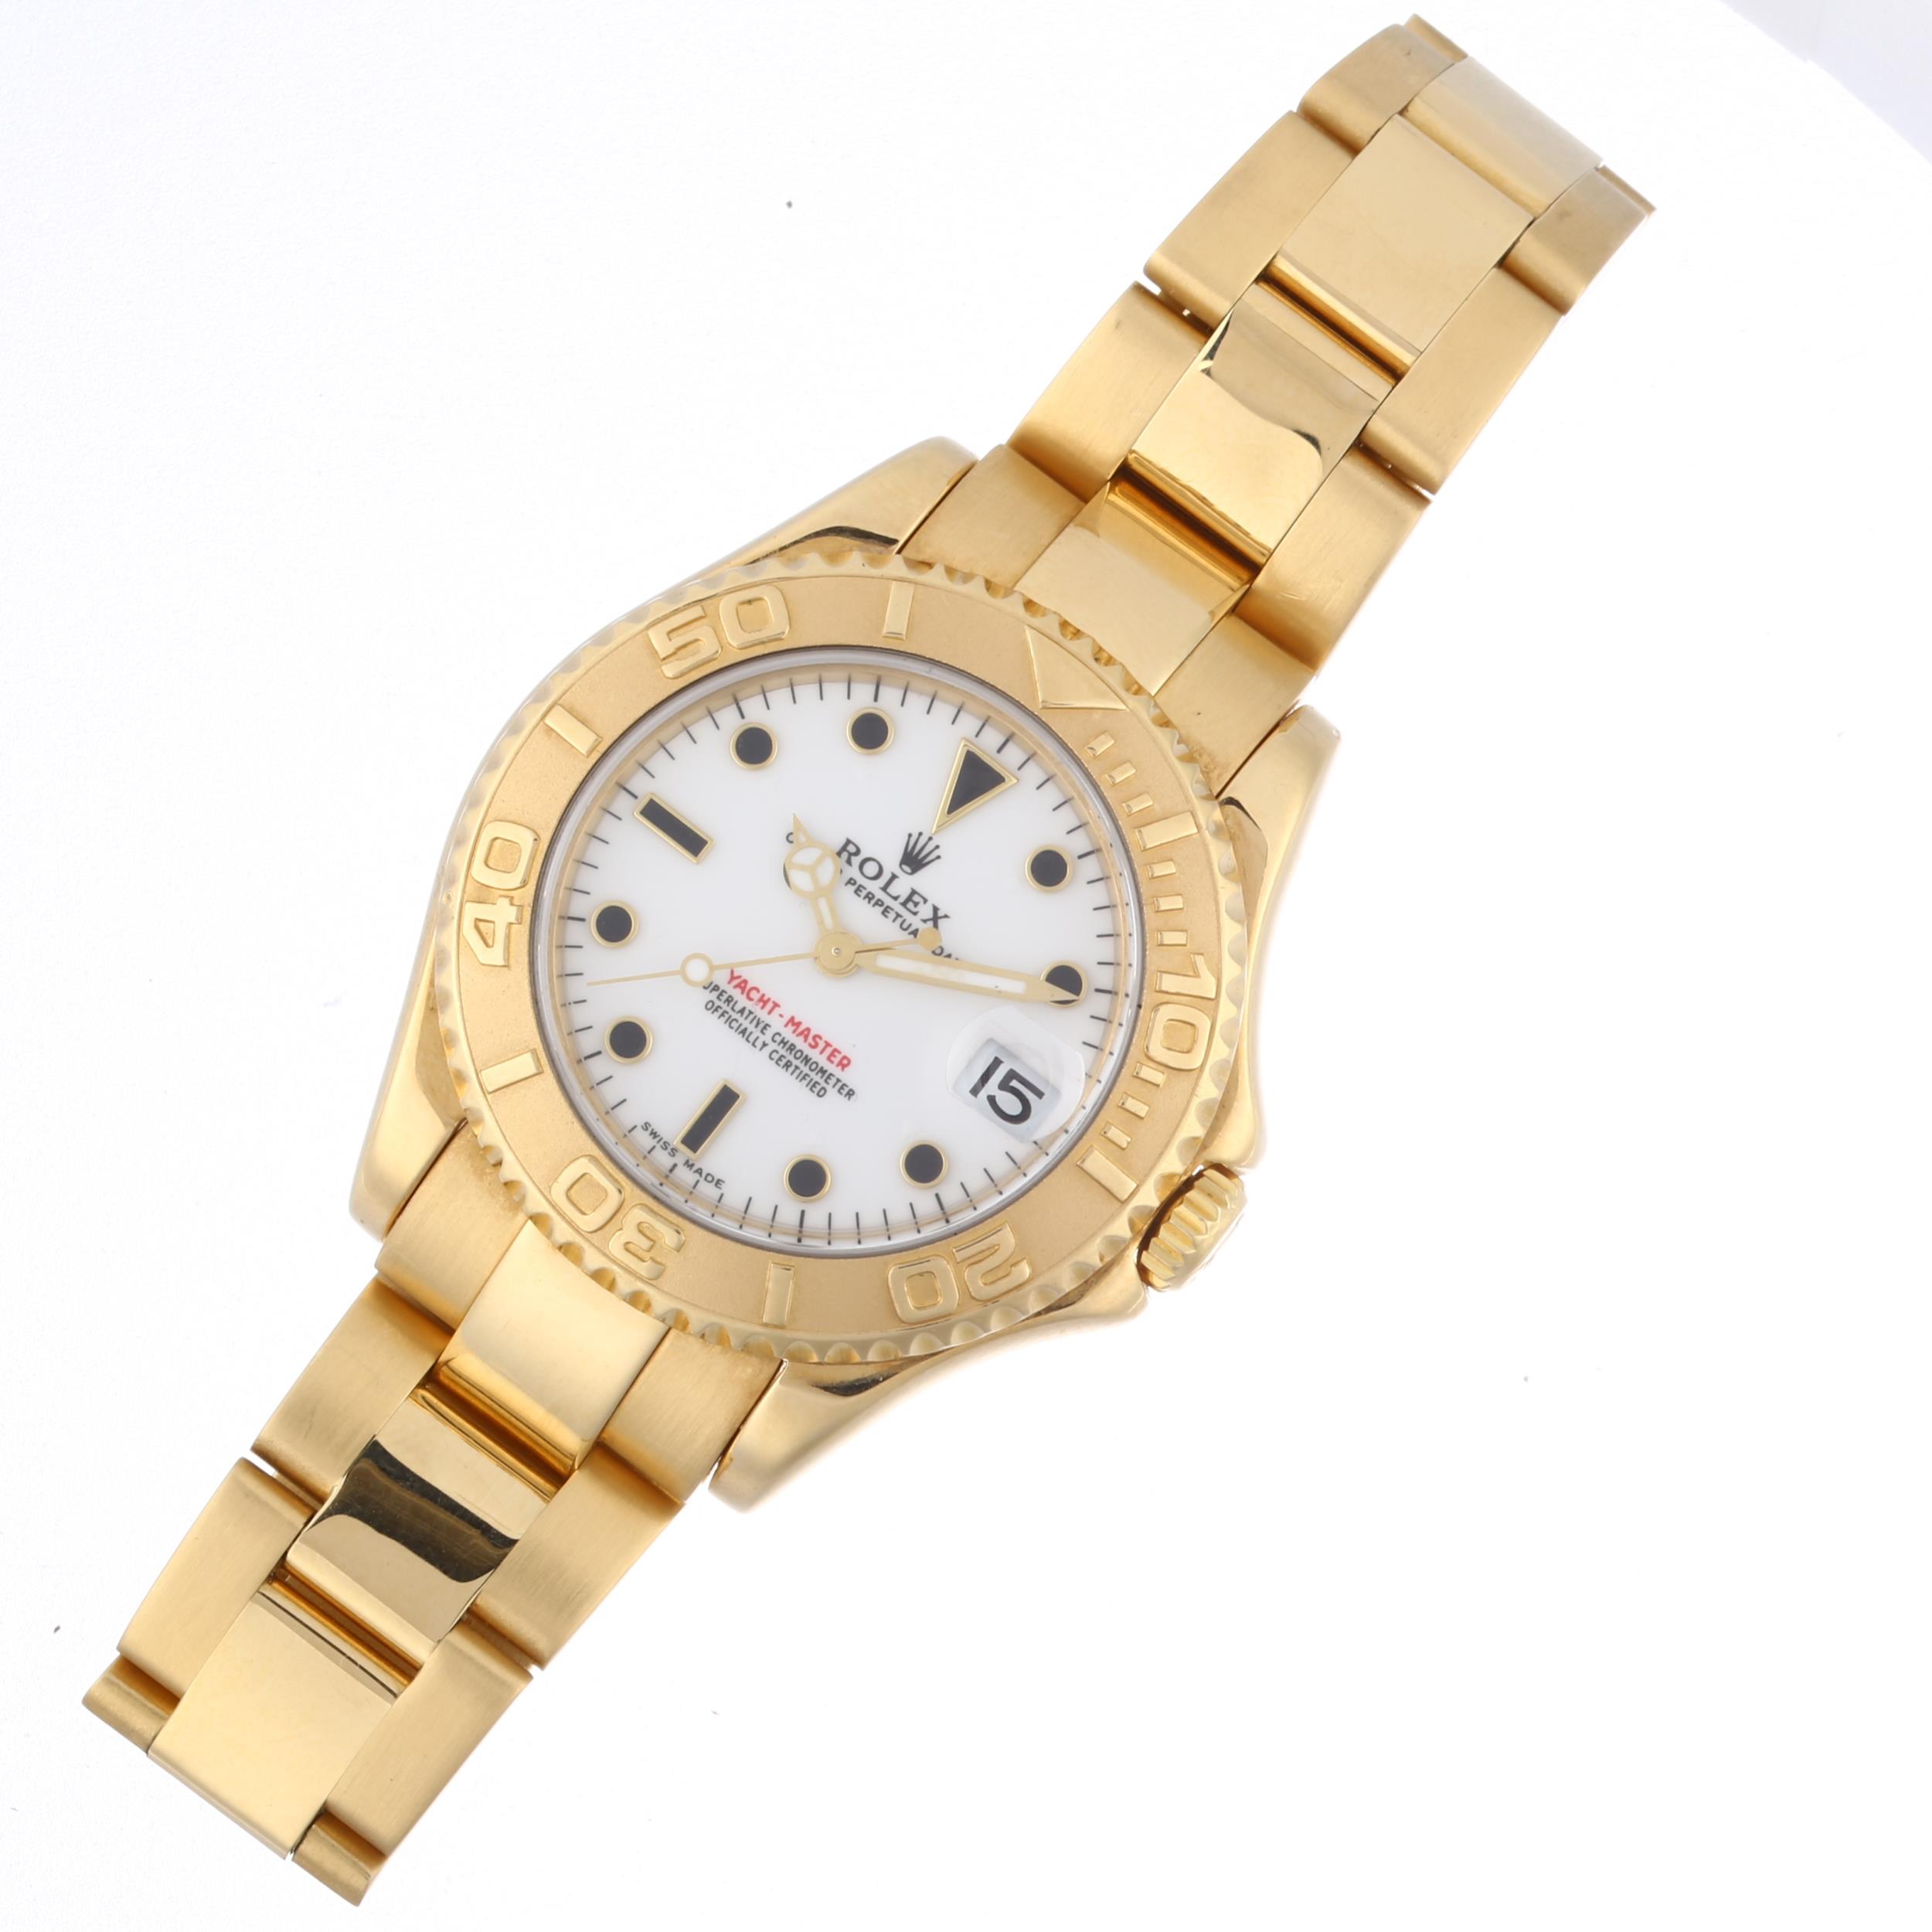 ROLEX - a mid-size 18ct gold Yacht-Master Date automatic bracelet watch, ref. 168628, circa 1999, - Image 2 of 5